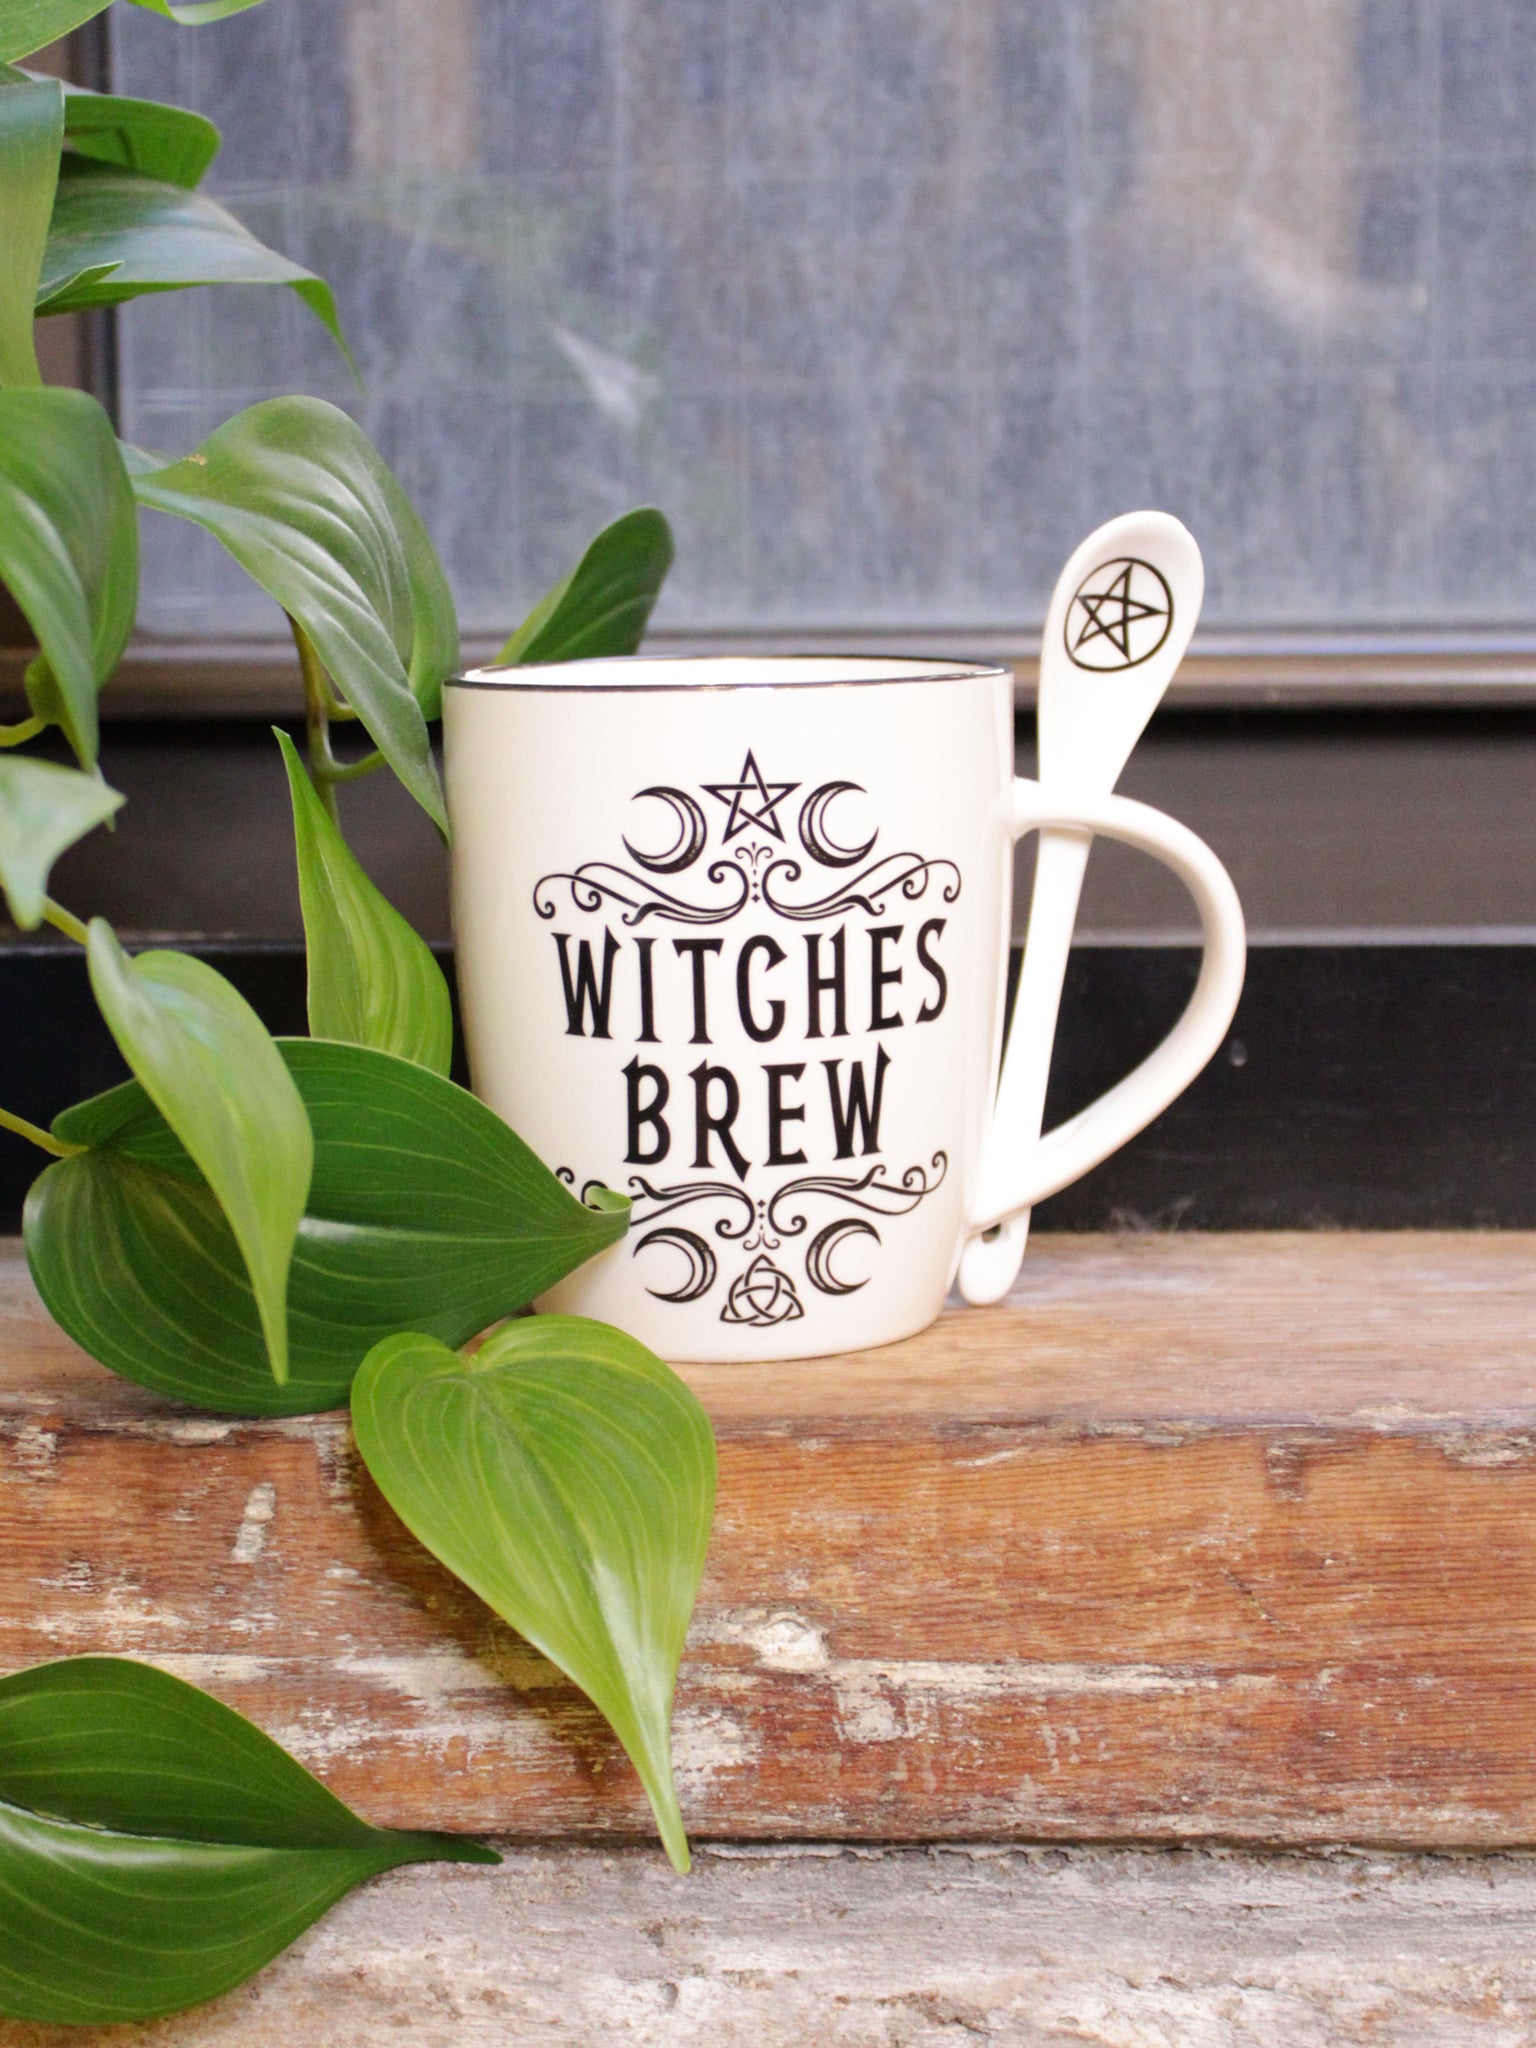 Witches Brew Cup and Spoon